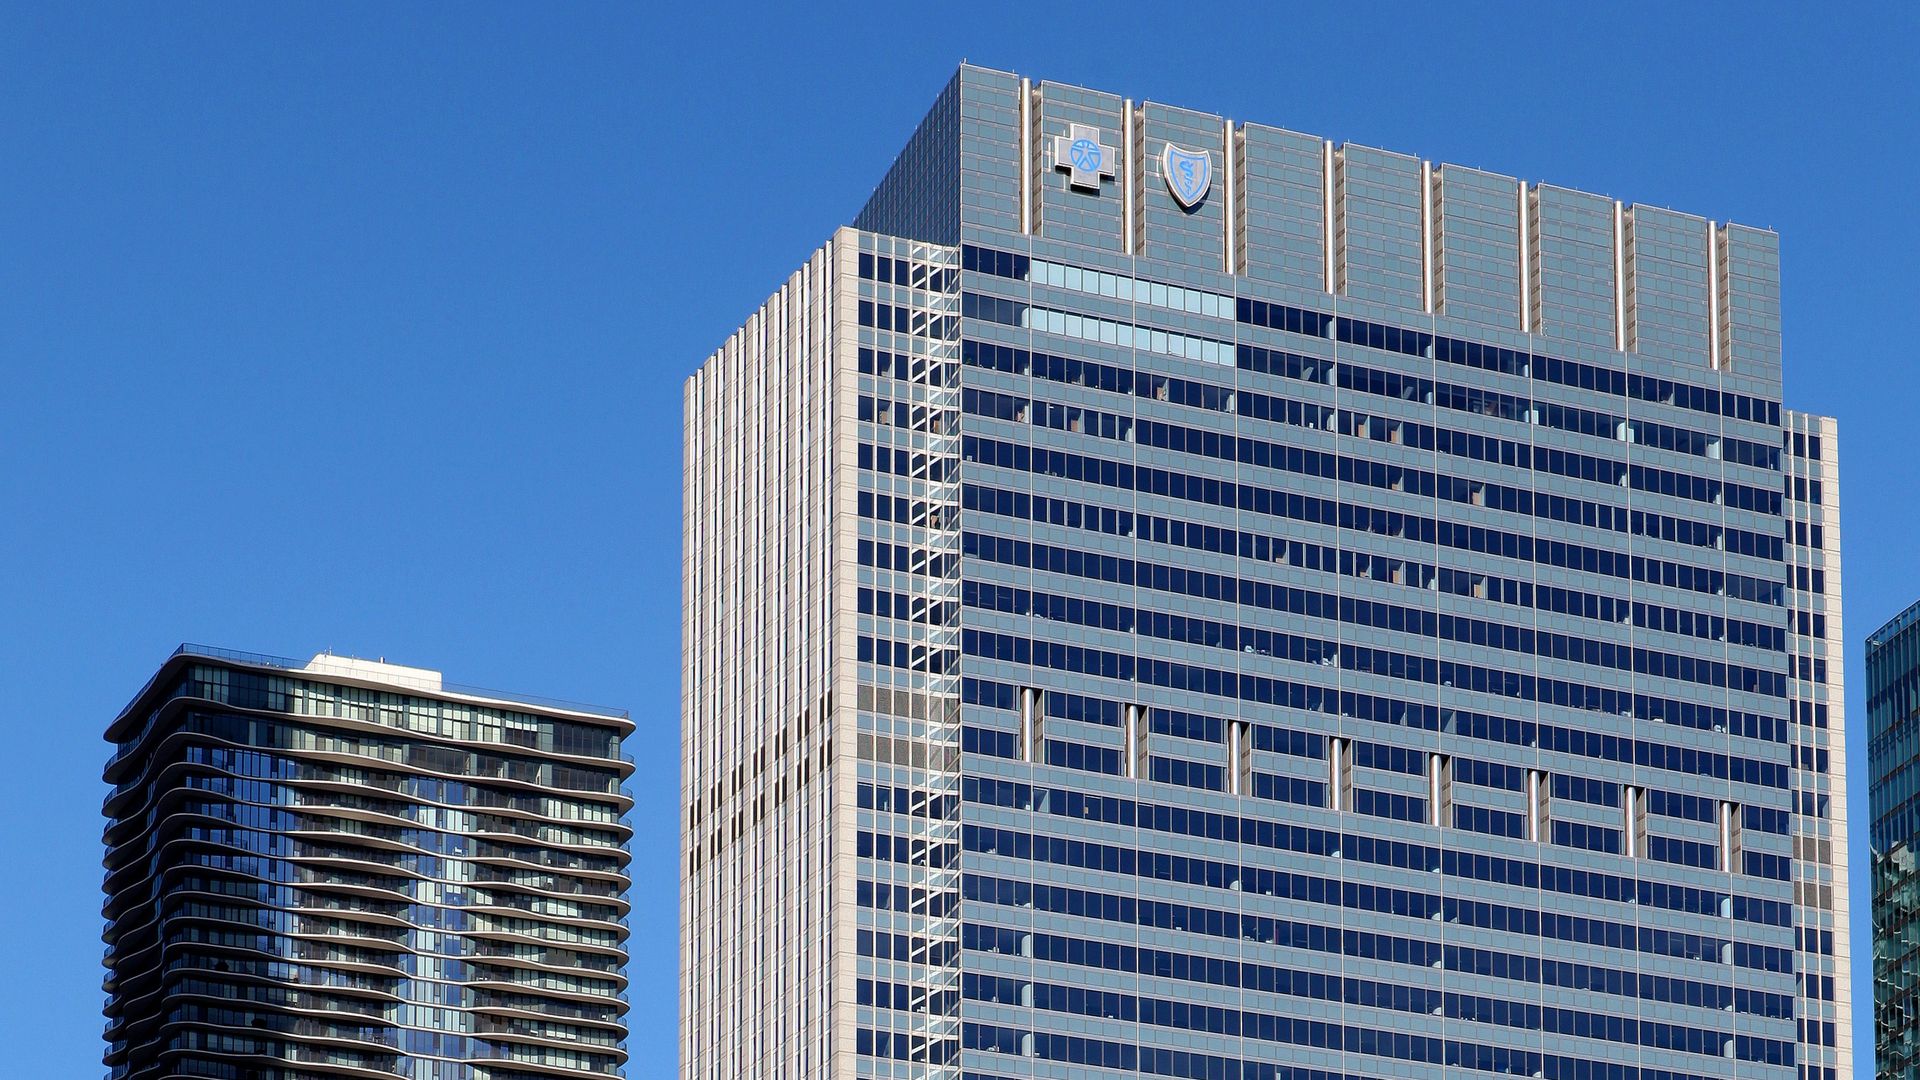 Two tall buildings with the Blue Cross Blue Shield logo on the one in the foreground.